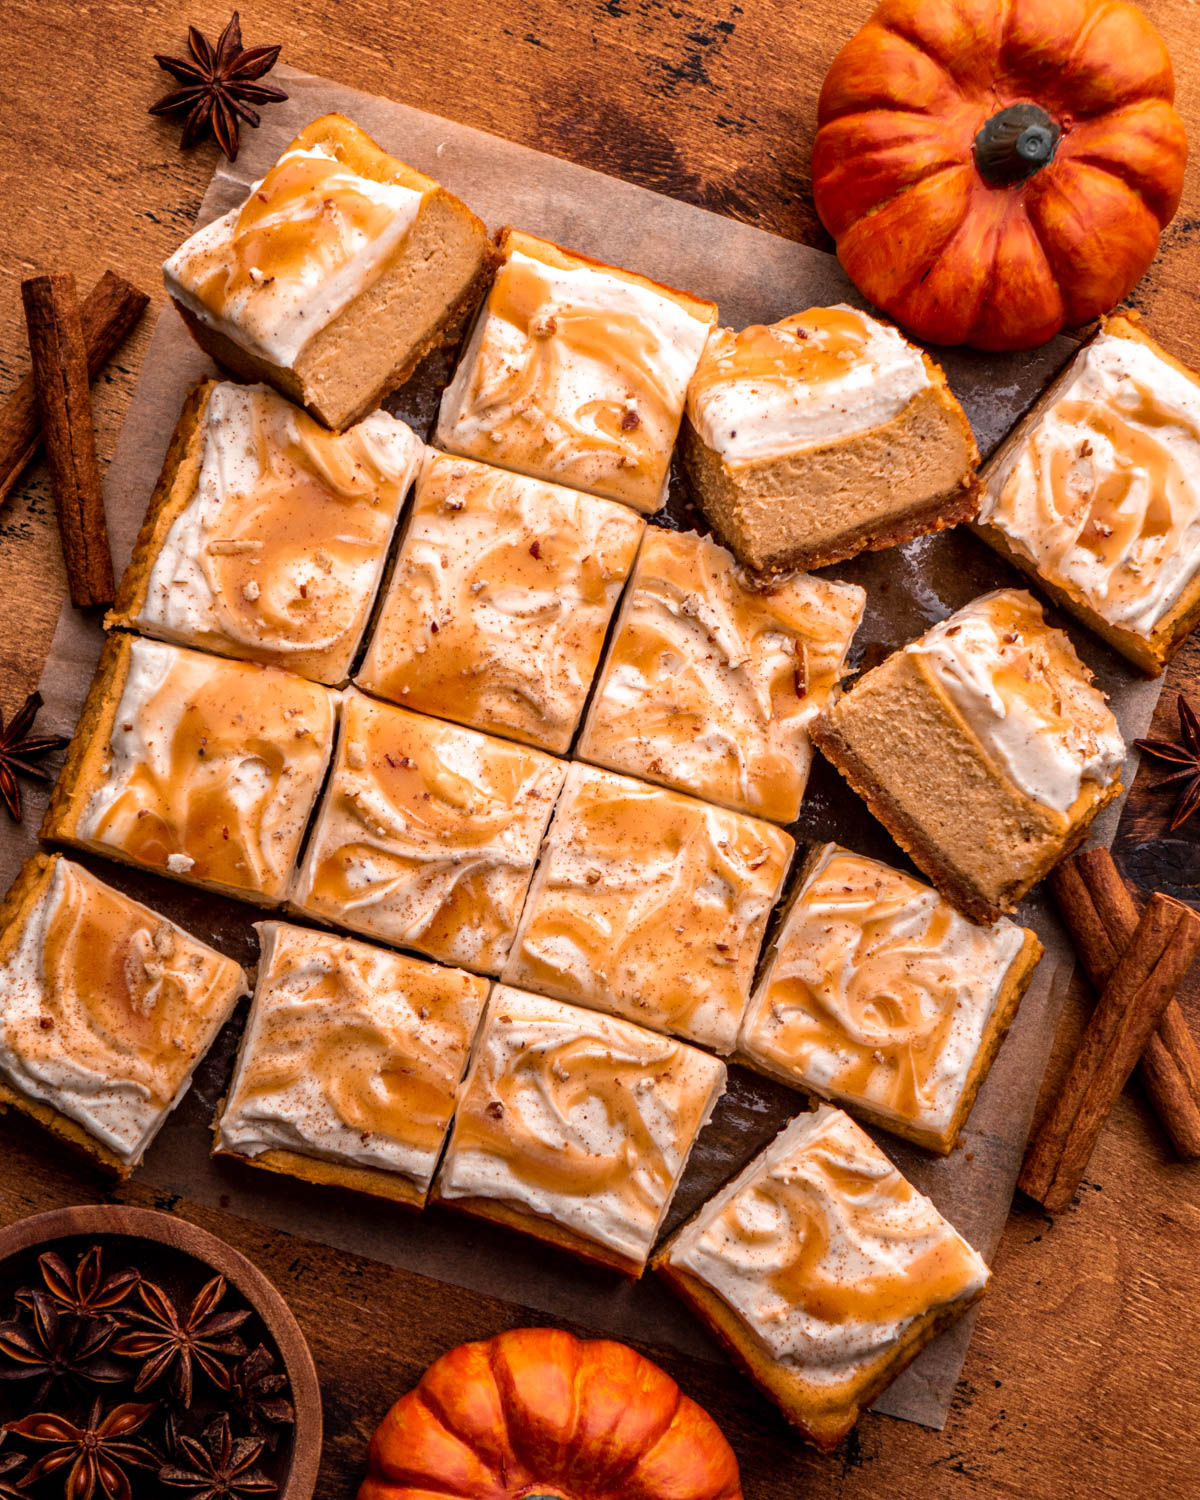 pumpkin cheesecake bars sliced into 16 bars and arranged on parchment paper